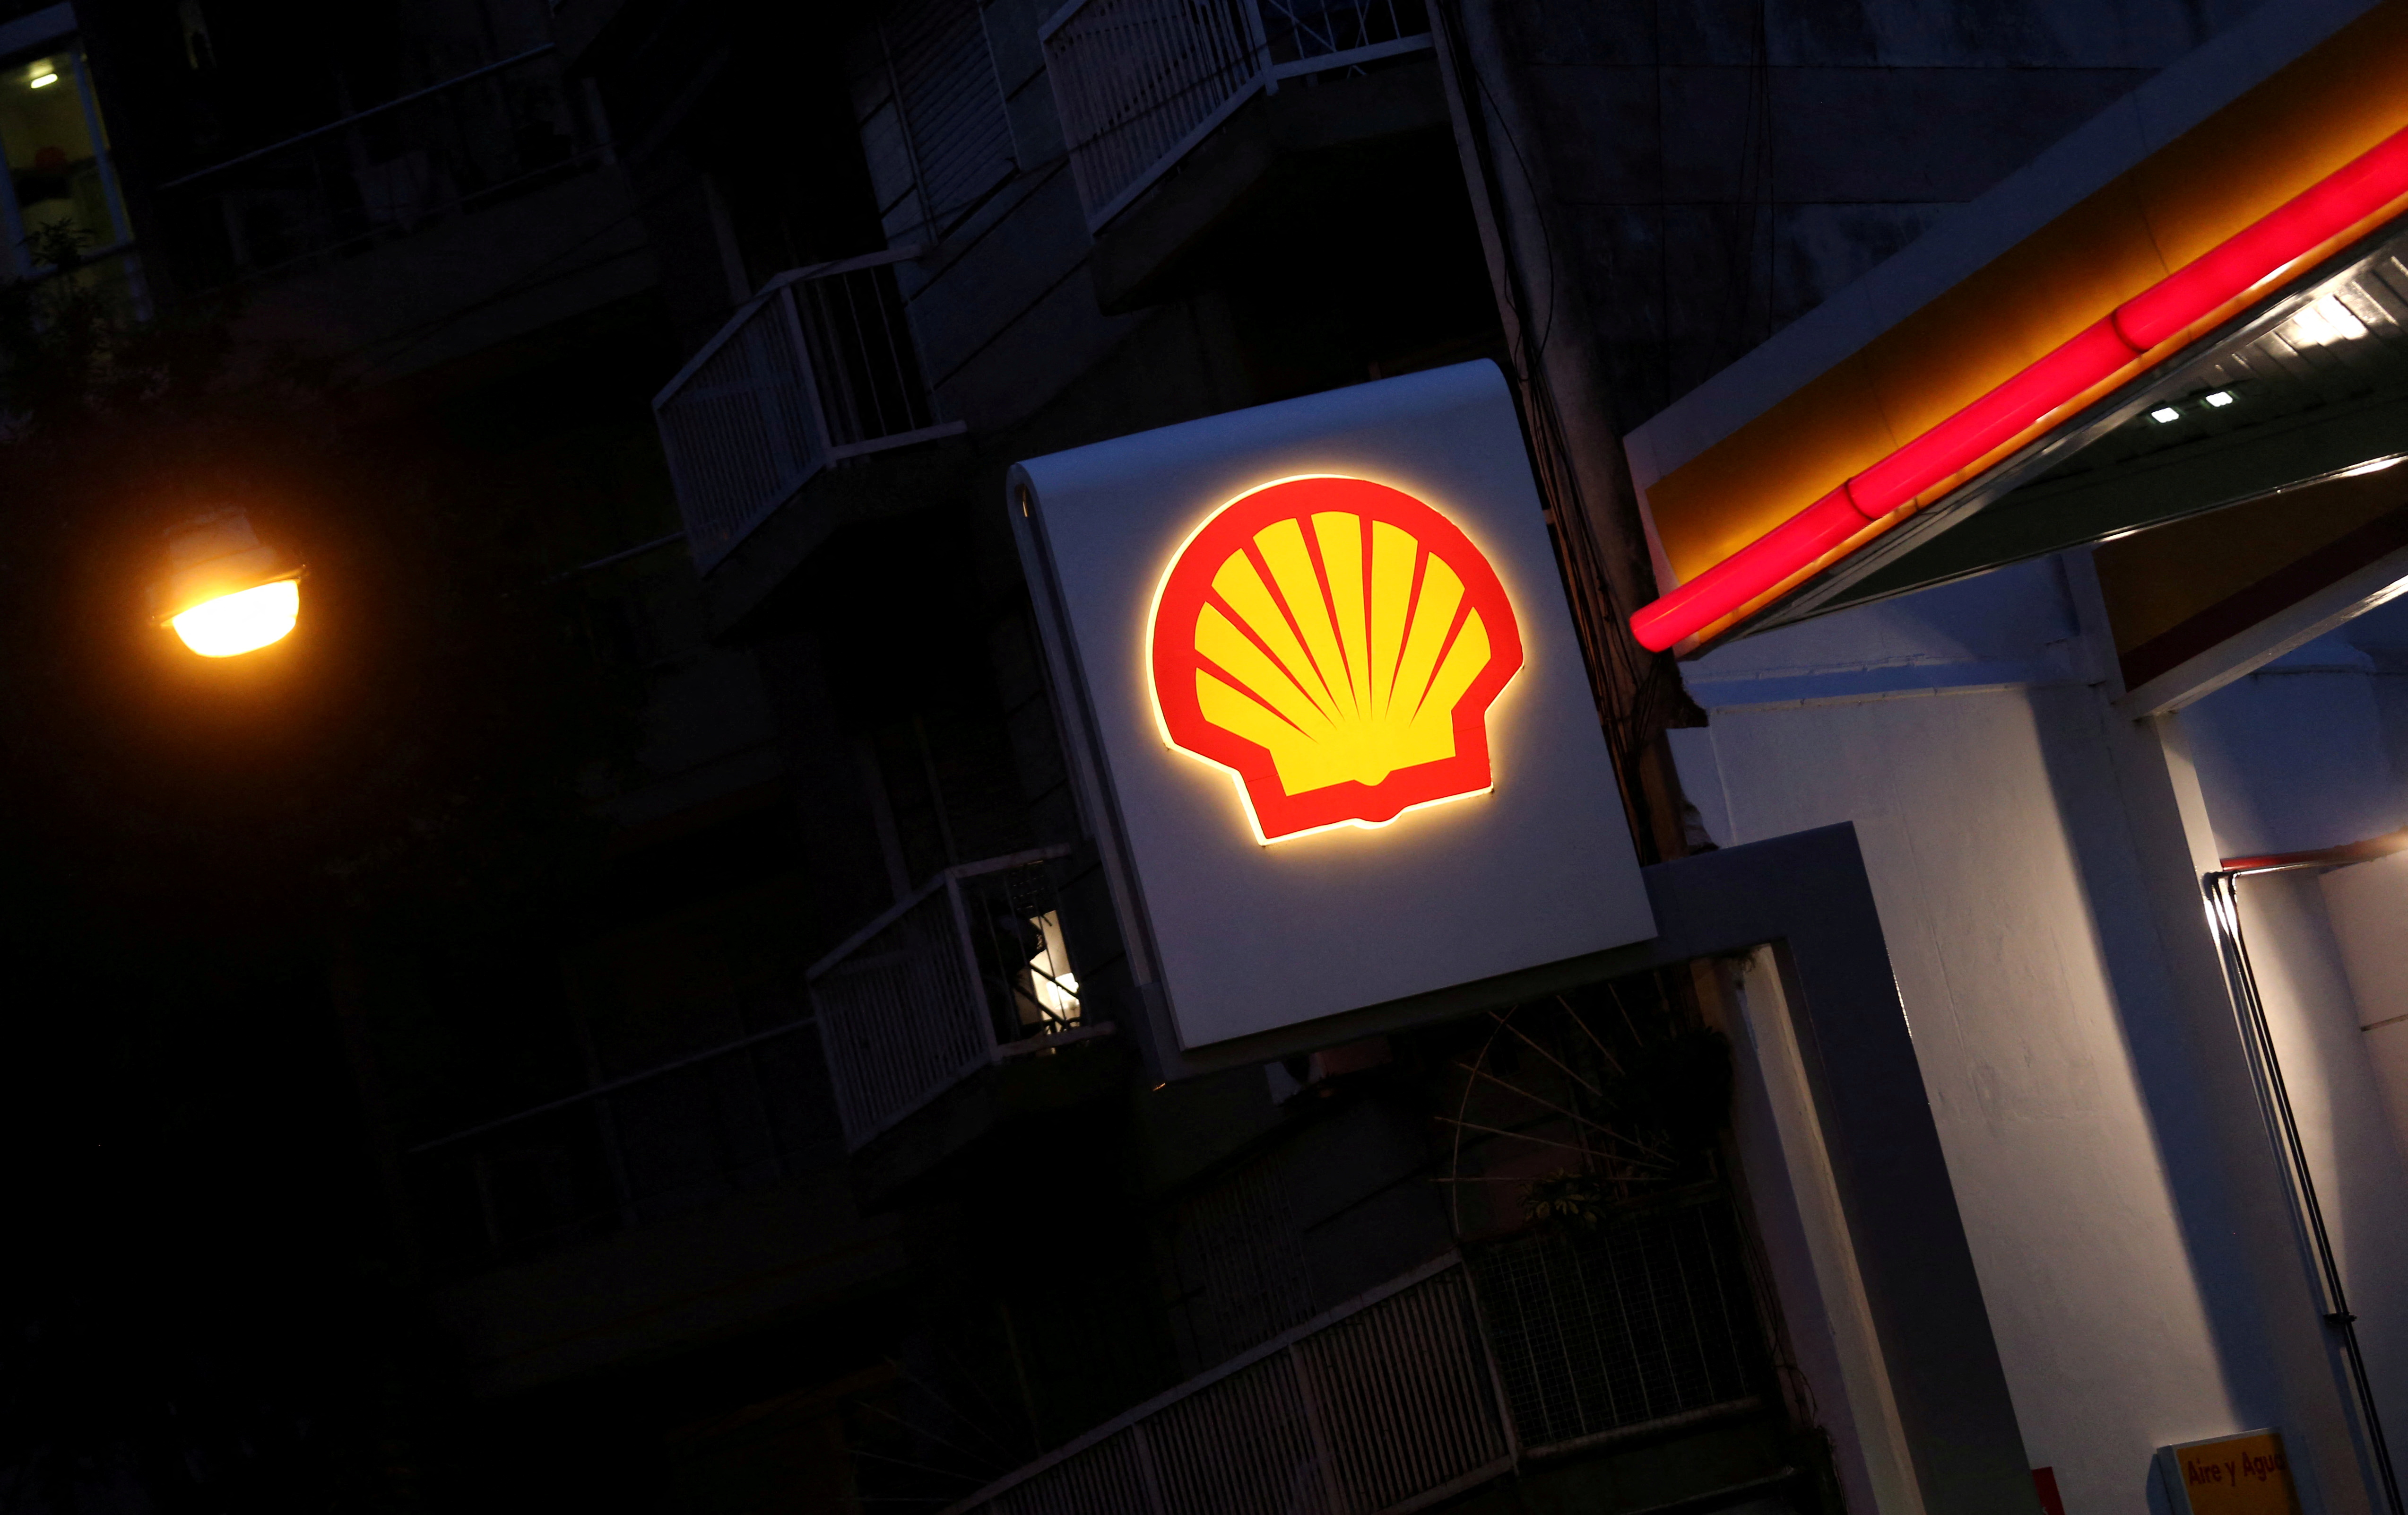 A Shell logo is seen at a gas station in Buenos Aires